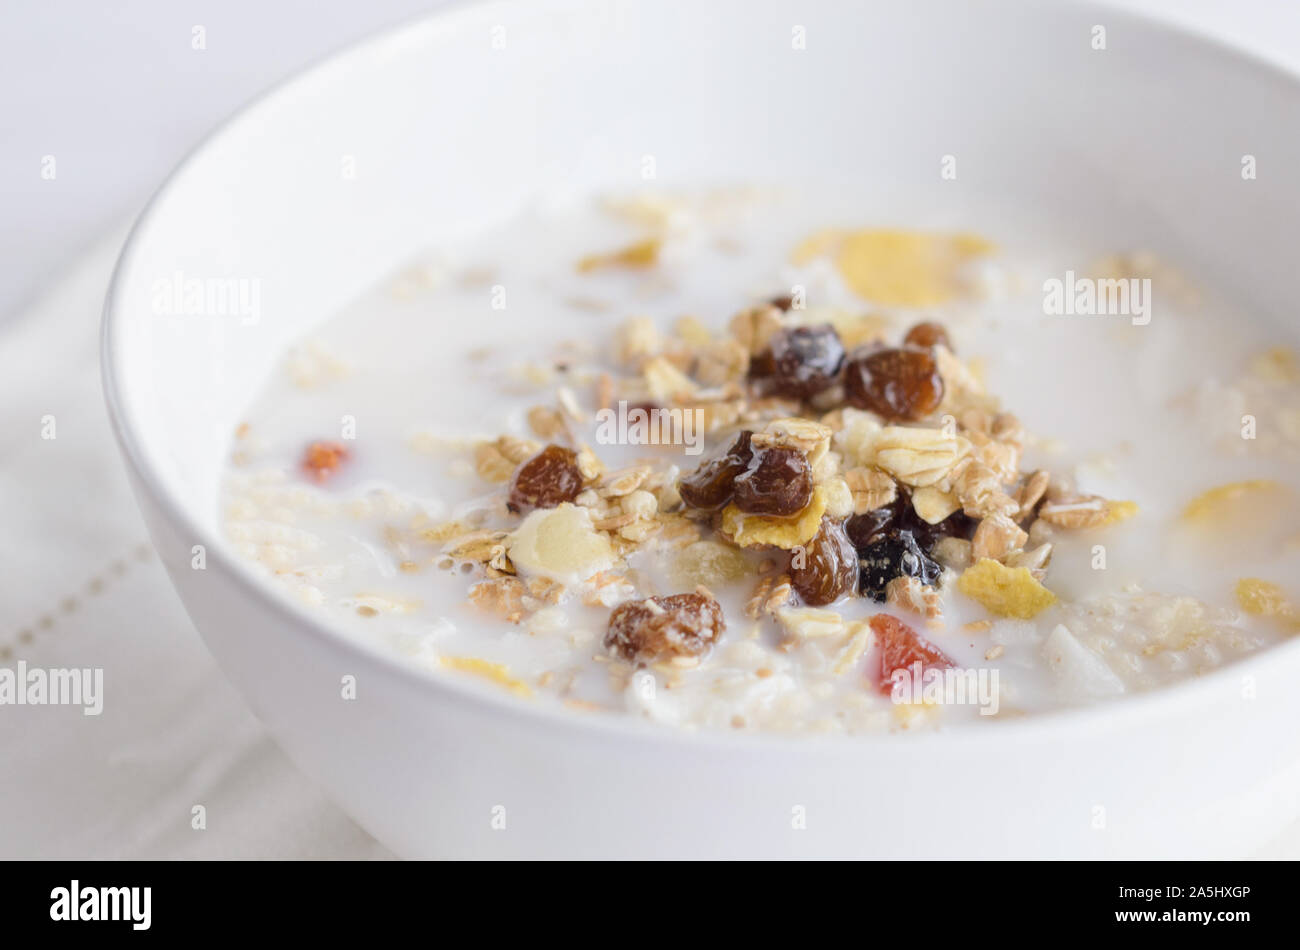 Muesli  bowl with  mix of unprocessed whole grains, nuts, seeds, fruit and vegan milk. Delicious breakfast meal for  energize your day. Heathy food li Stock Photo